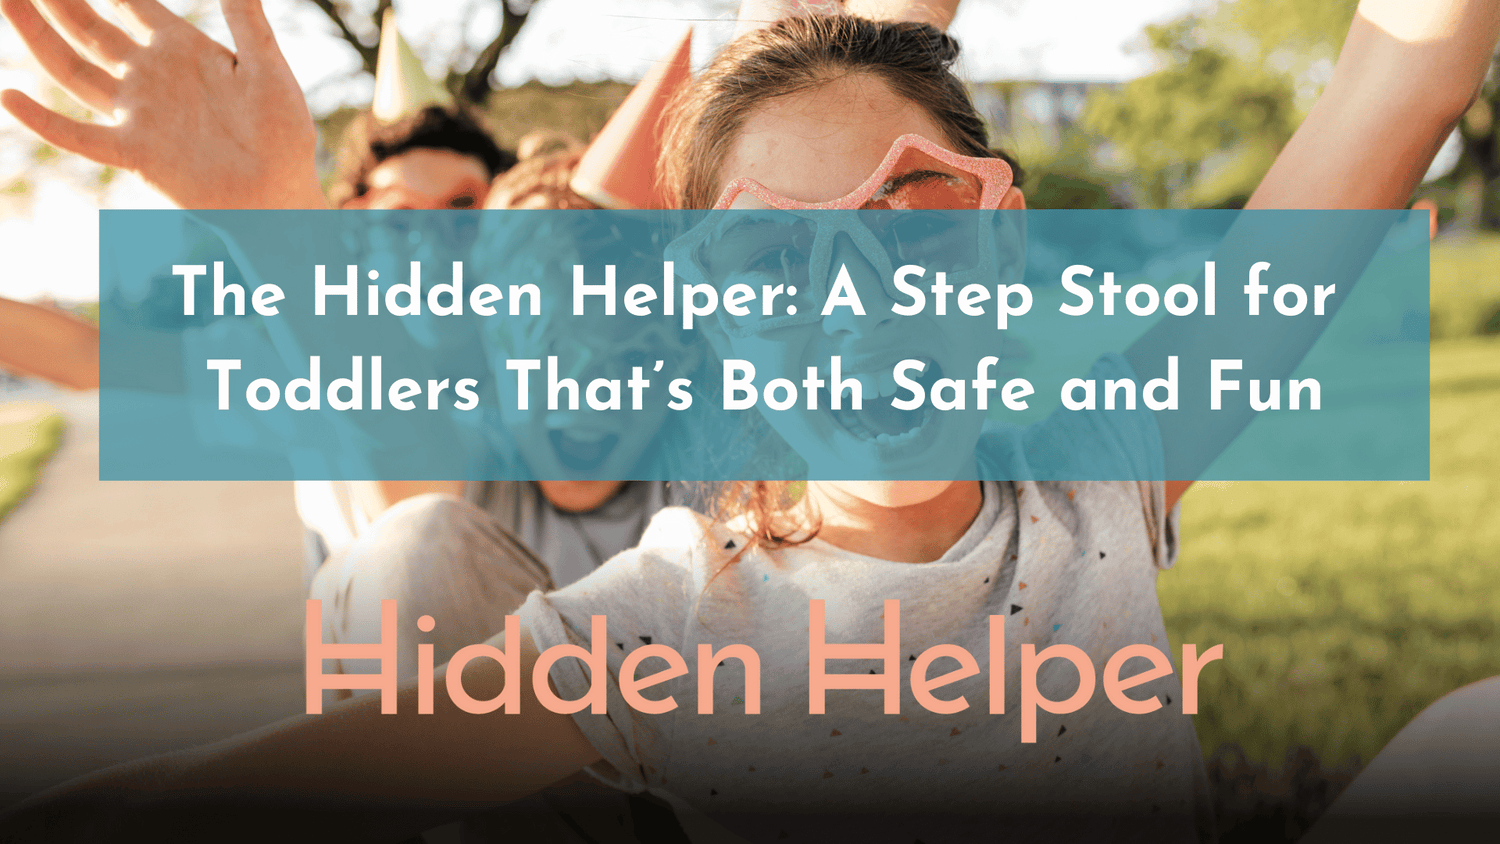 The Hidden Helper: A Step Stool for Toddlers That’s Both Safe and Fun